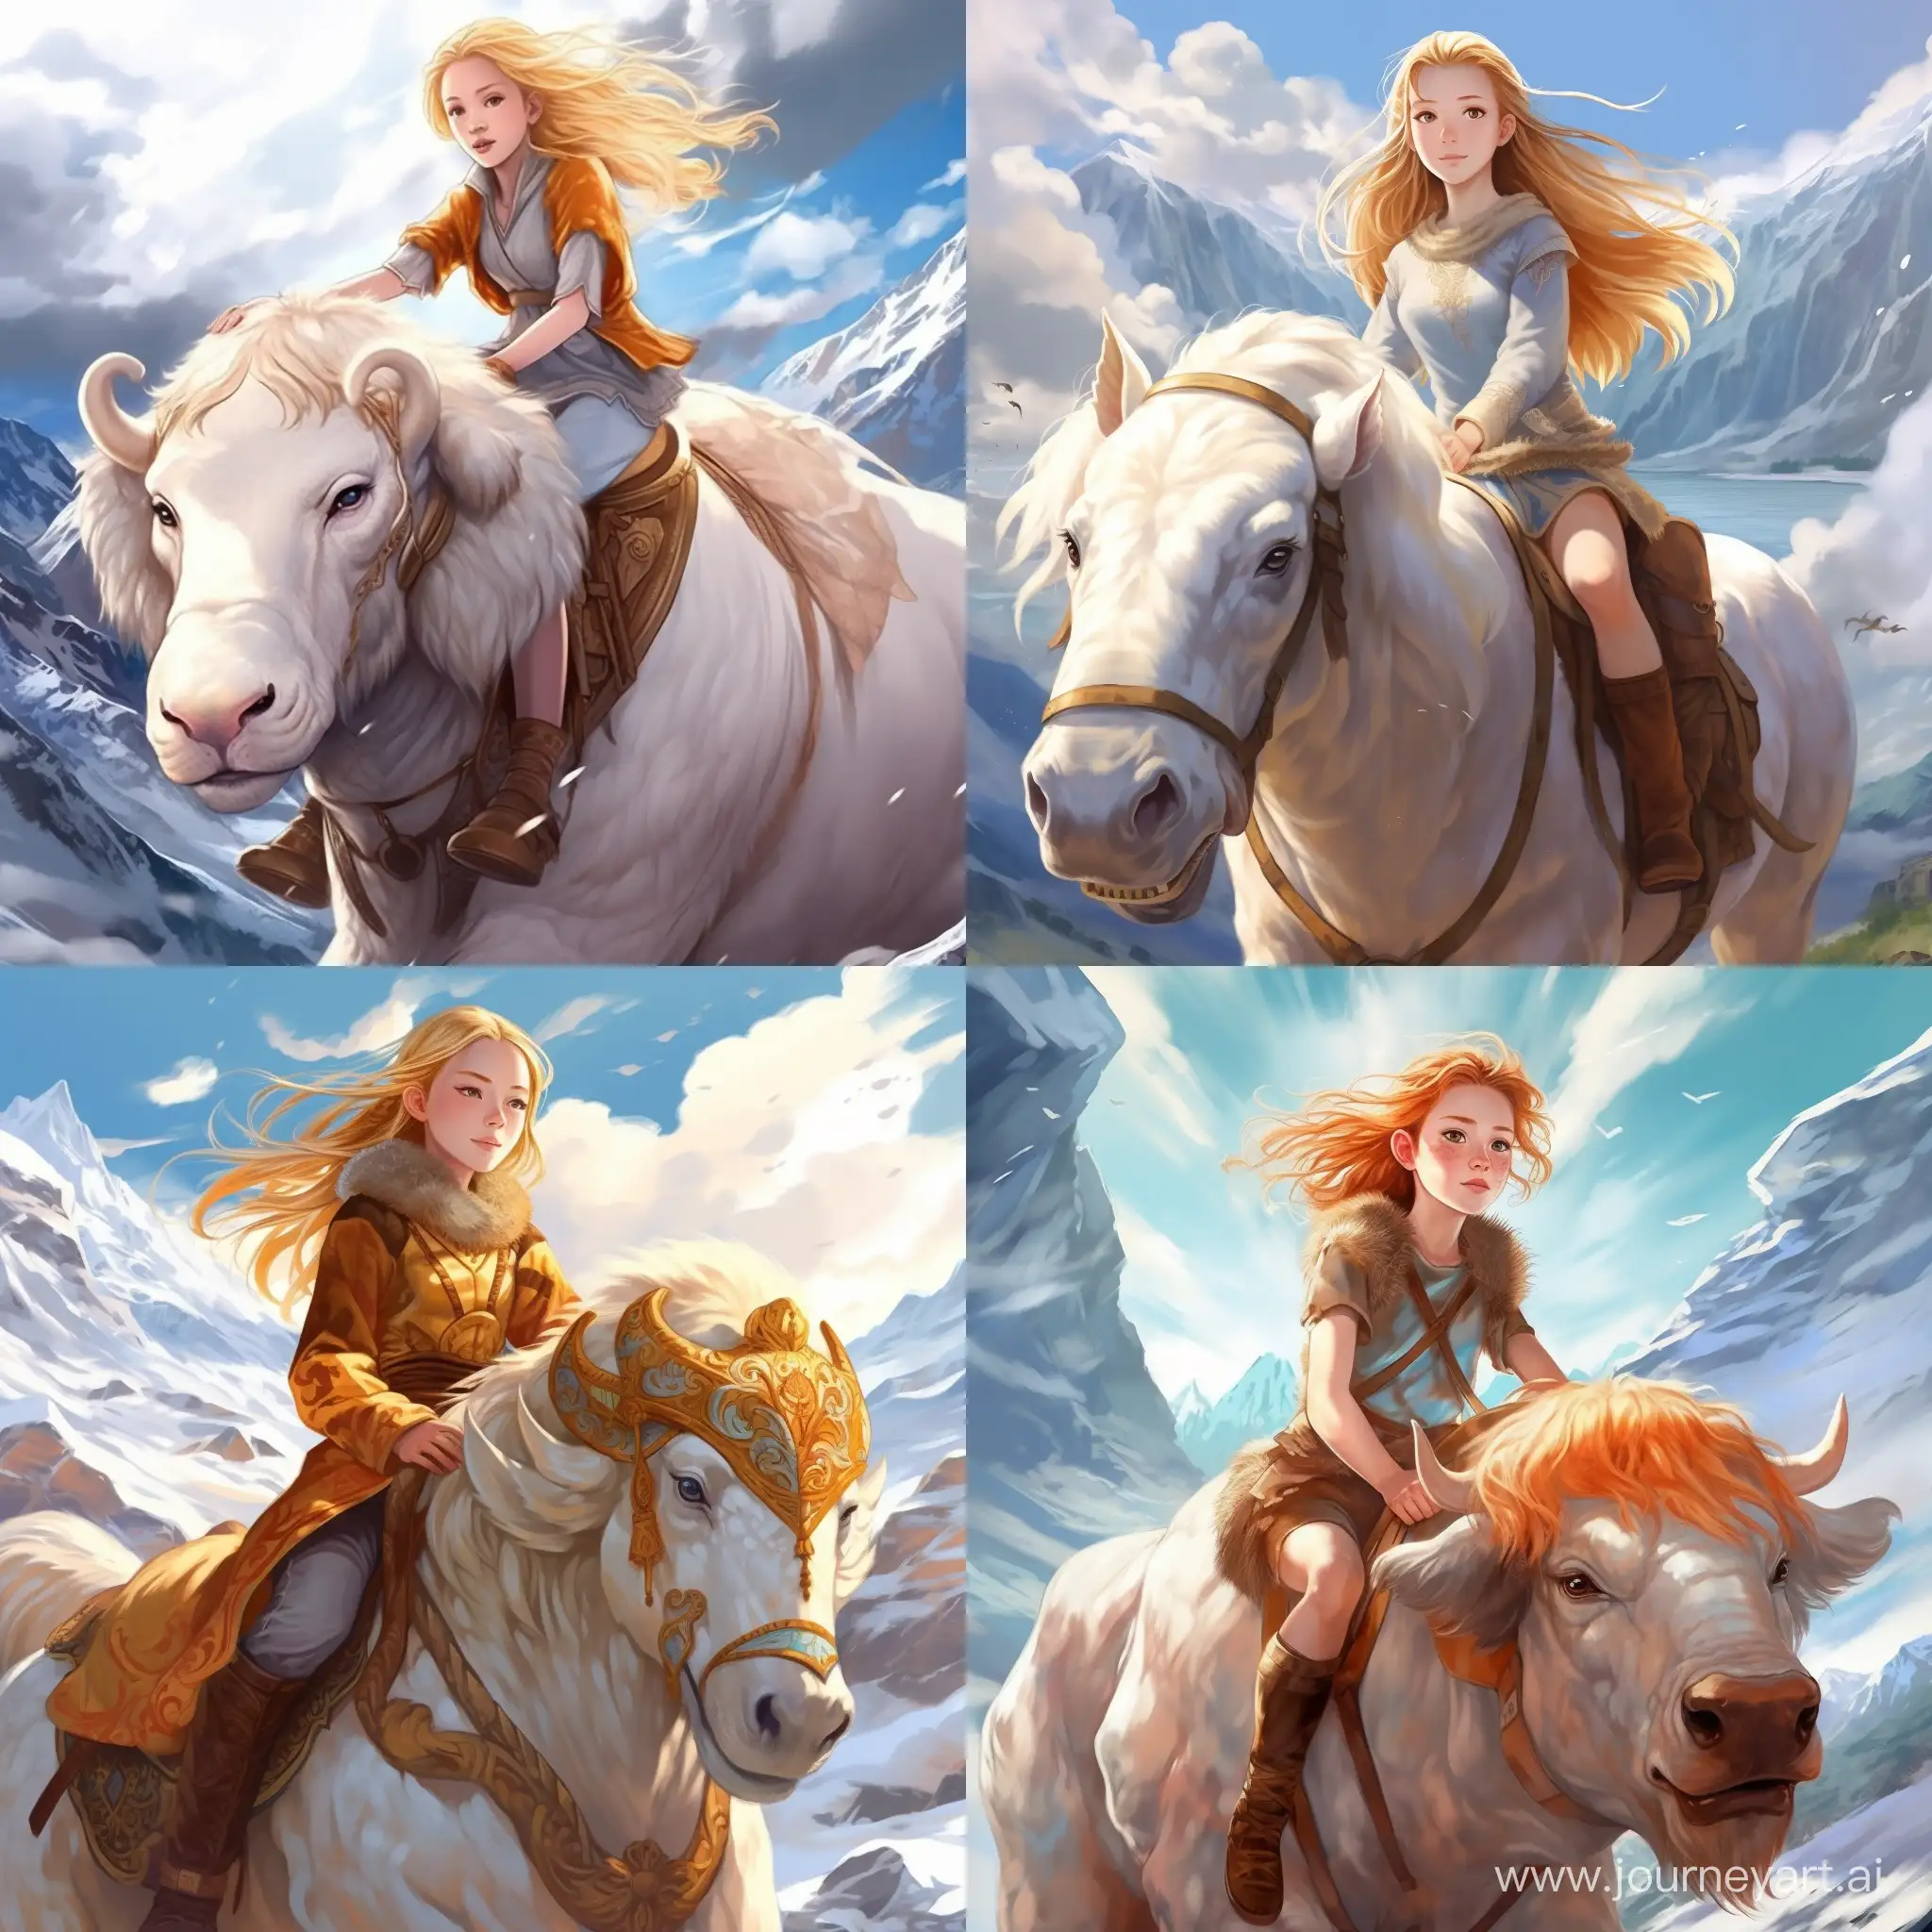 Beautiful girl, golden hair, gray-blue eyes, snow-white skin, teenager, 14 years old, in the style of avatar the legend of aang, full-length, riding a flying bison Appa, a bison the size of a house, in the sky, clouds, high quality, high detail, cartoon art